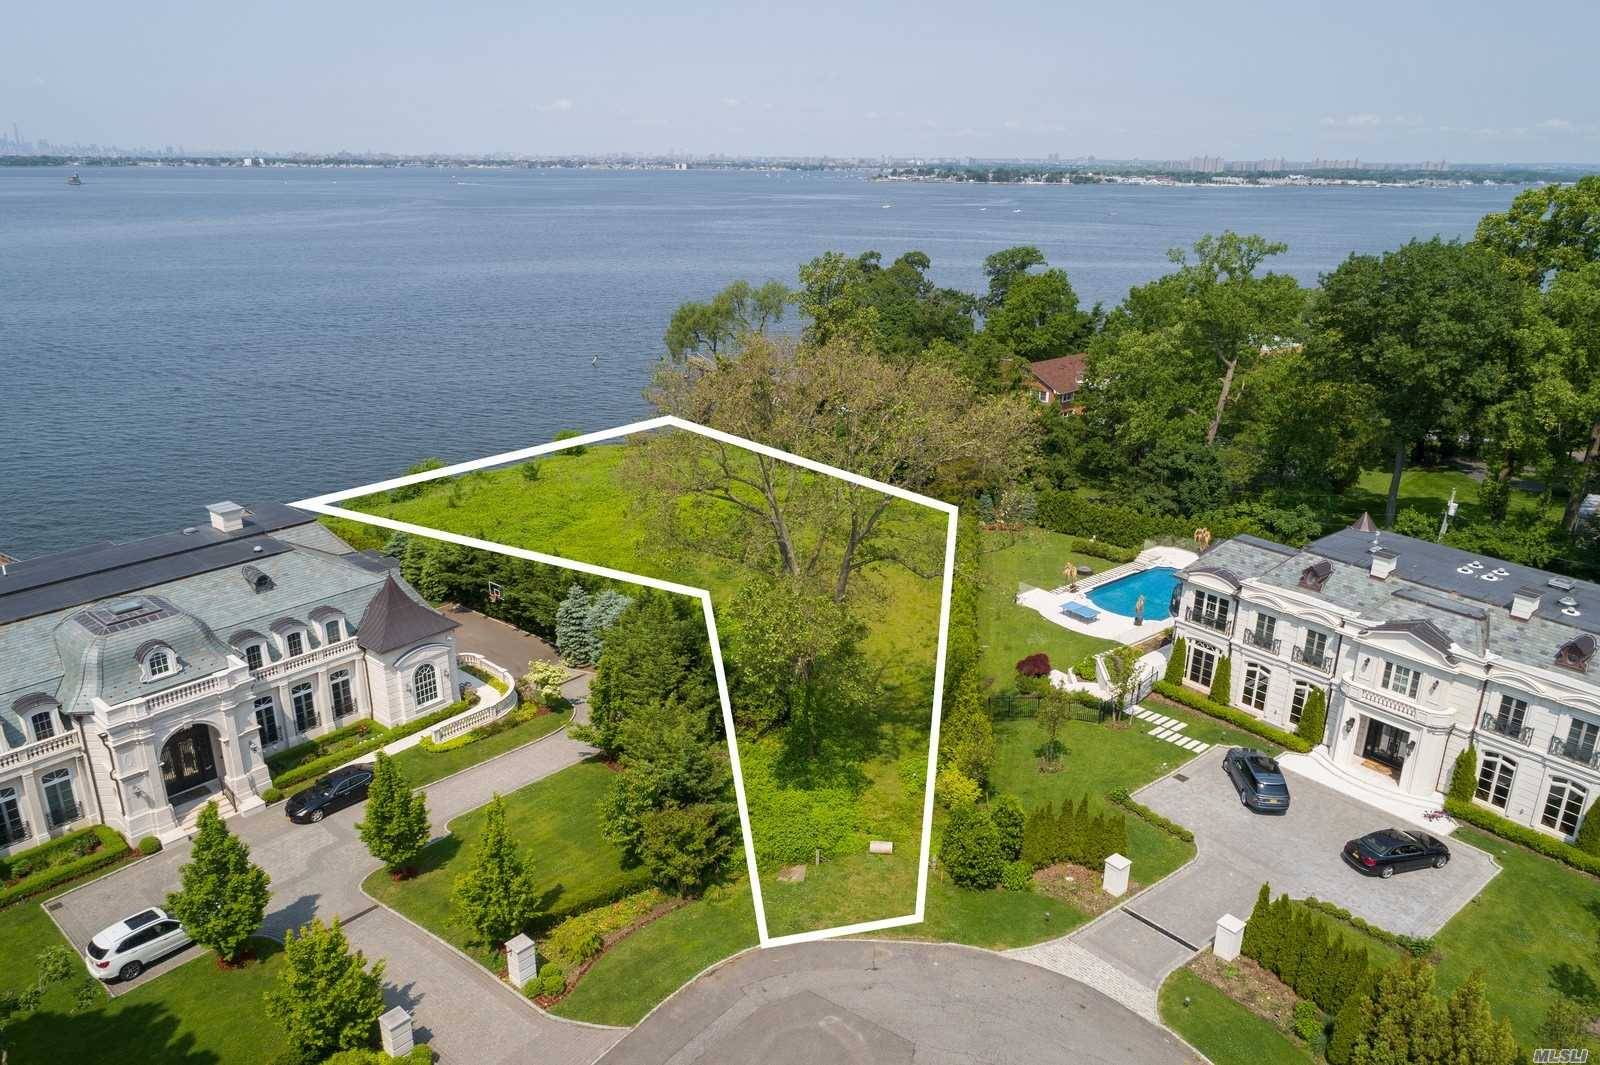 Build your dream home on this magnificent waterfront property with views of Manhattan and the bridges in one of the most sought after areas of Kings Point.